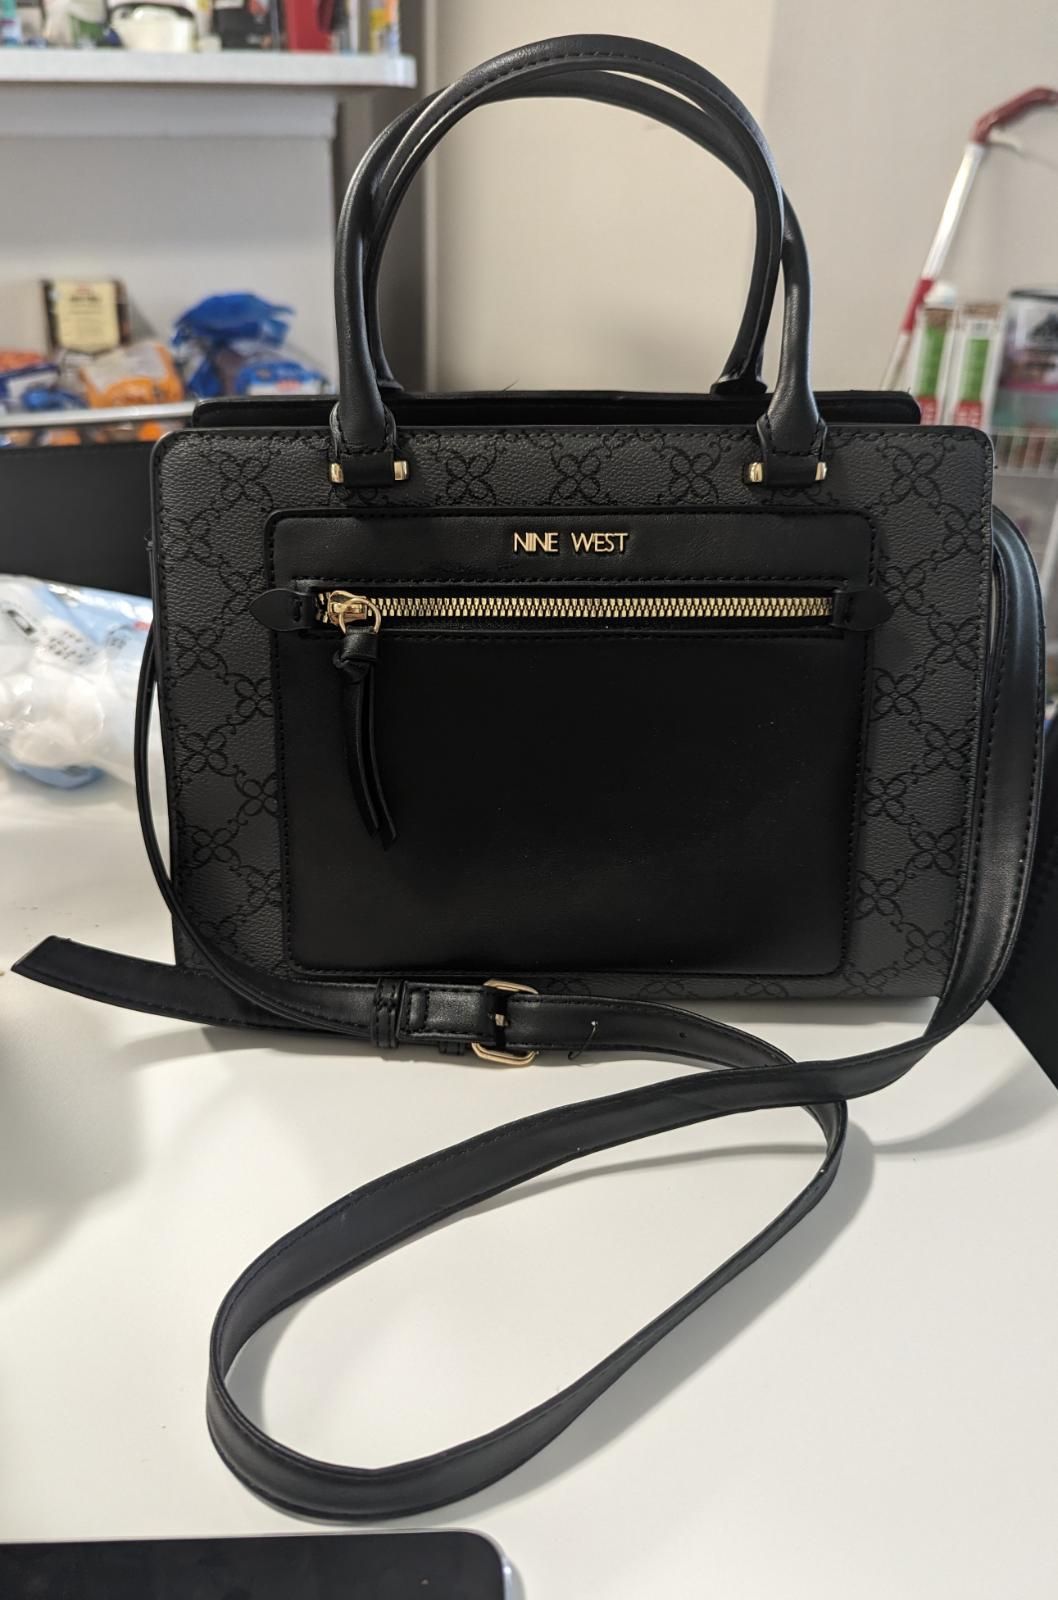 Nine West Purse And Wallet